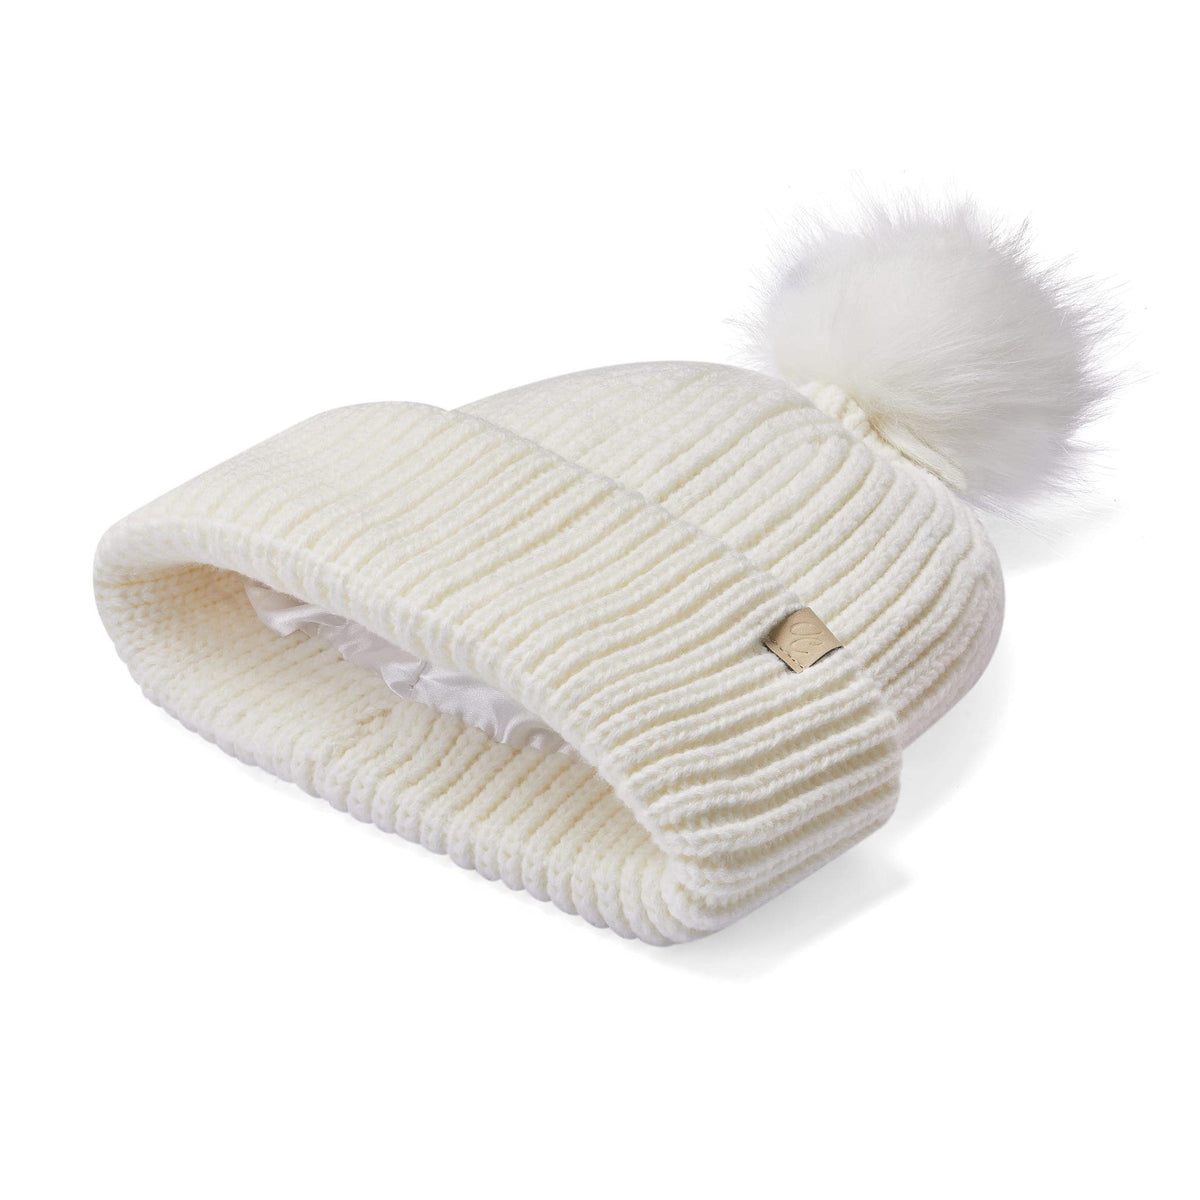 Only Curls Chunky Satin Lined Beanie - Cream with Pom Pom - Only Curls